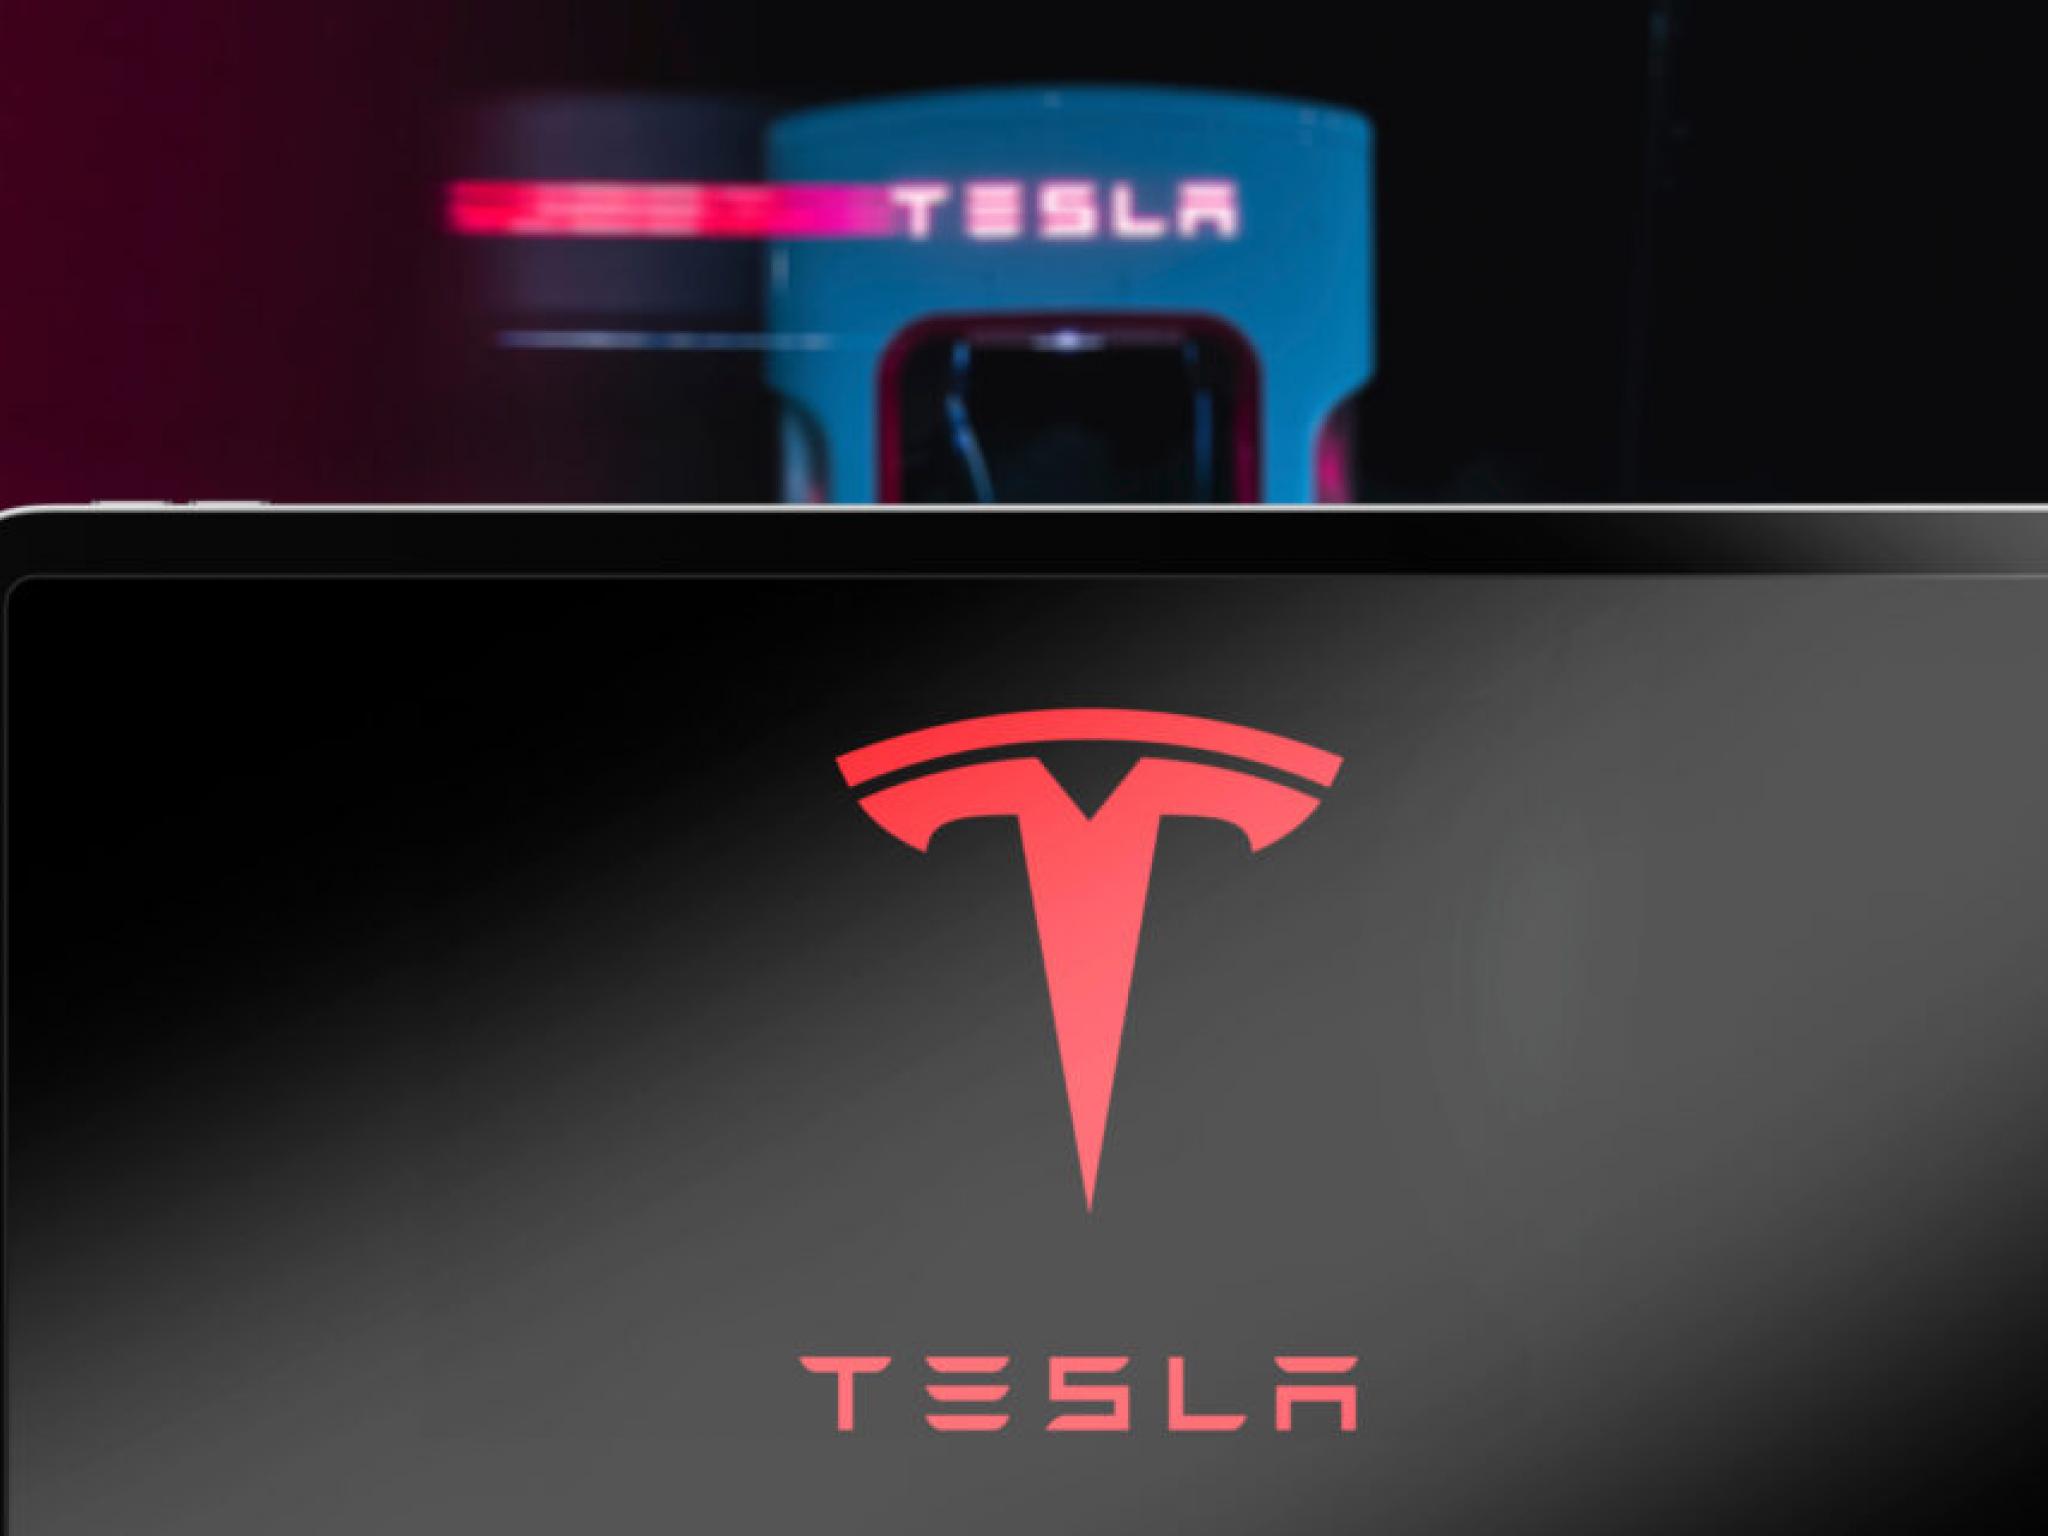  tesla-alienates-investors-with-sketchy-near-term-outlook-rivians-rumored-r2-global-premiere-canoo-on-a-roll-biggest-ev-stories-of-the-week 